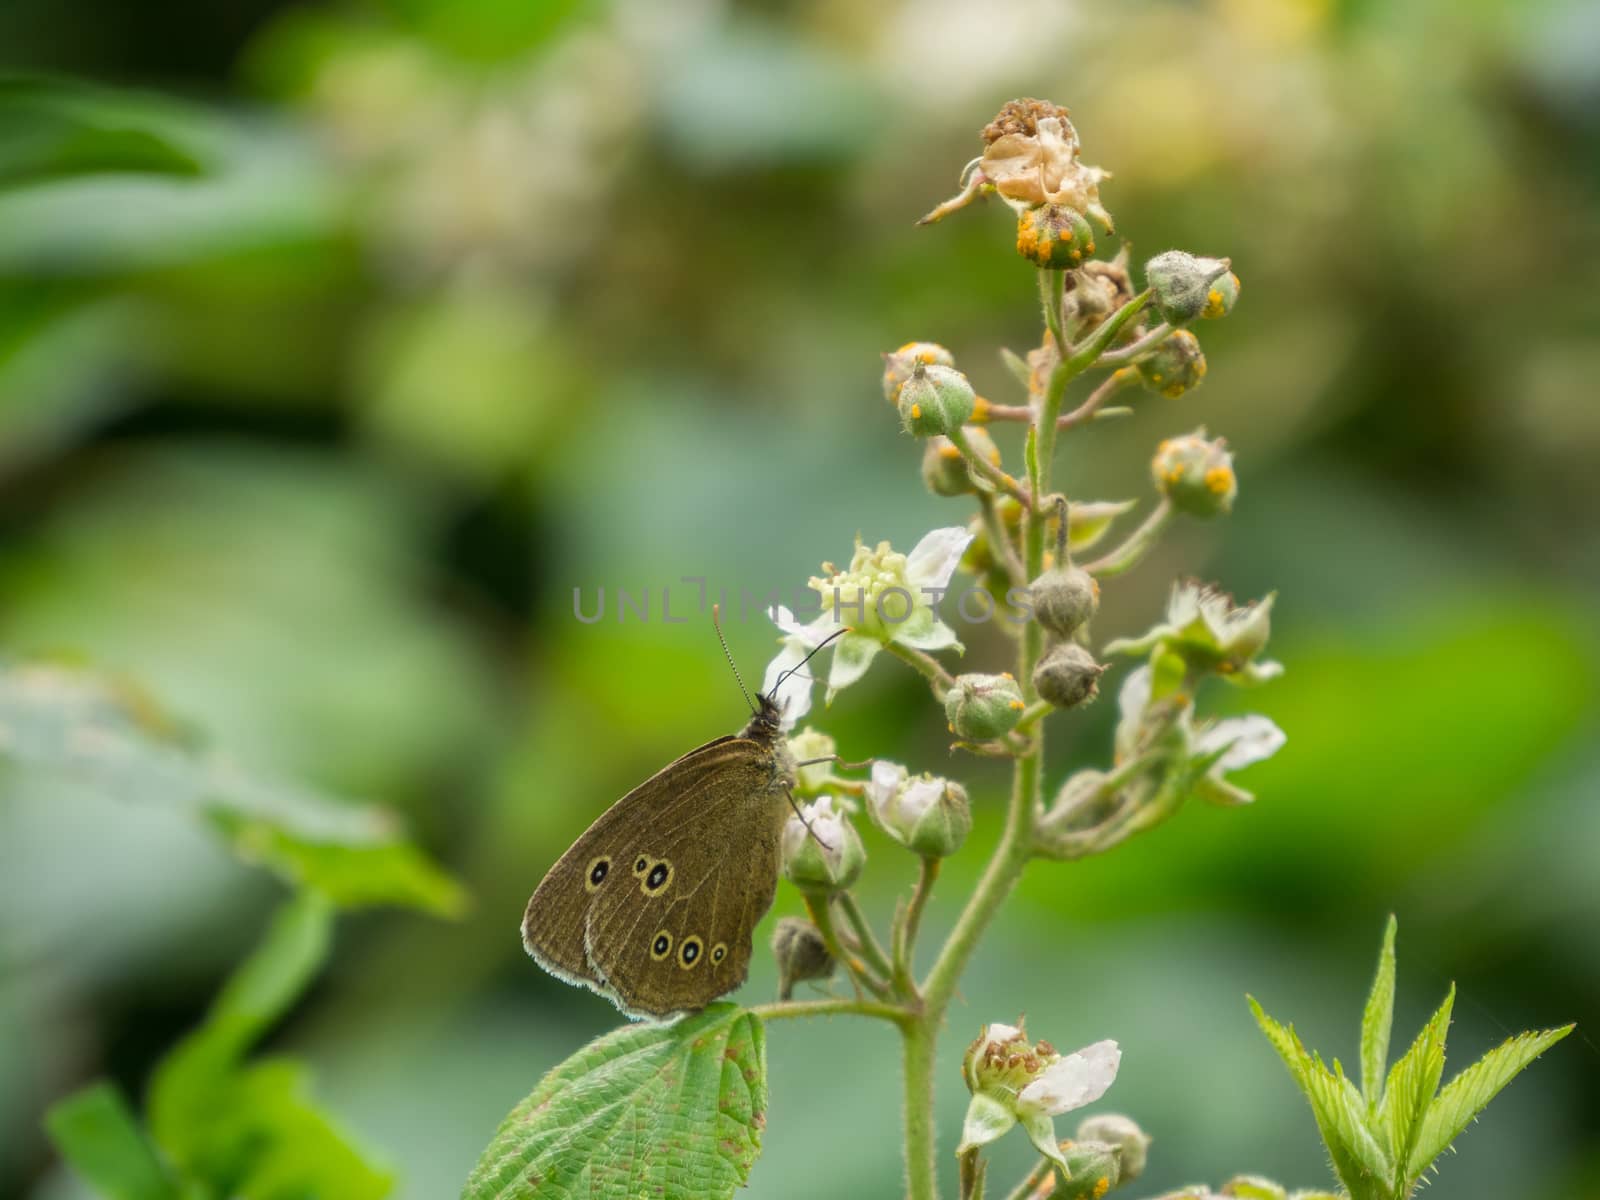 Brown wild butterfly with spot on side of a plant